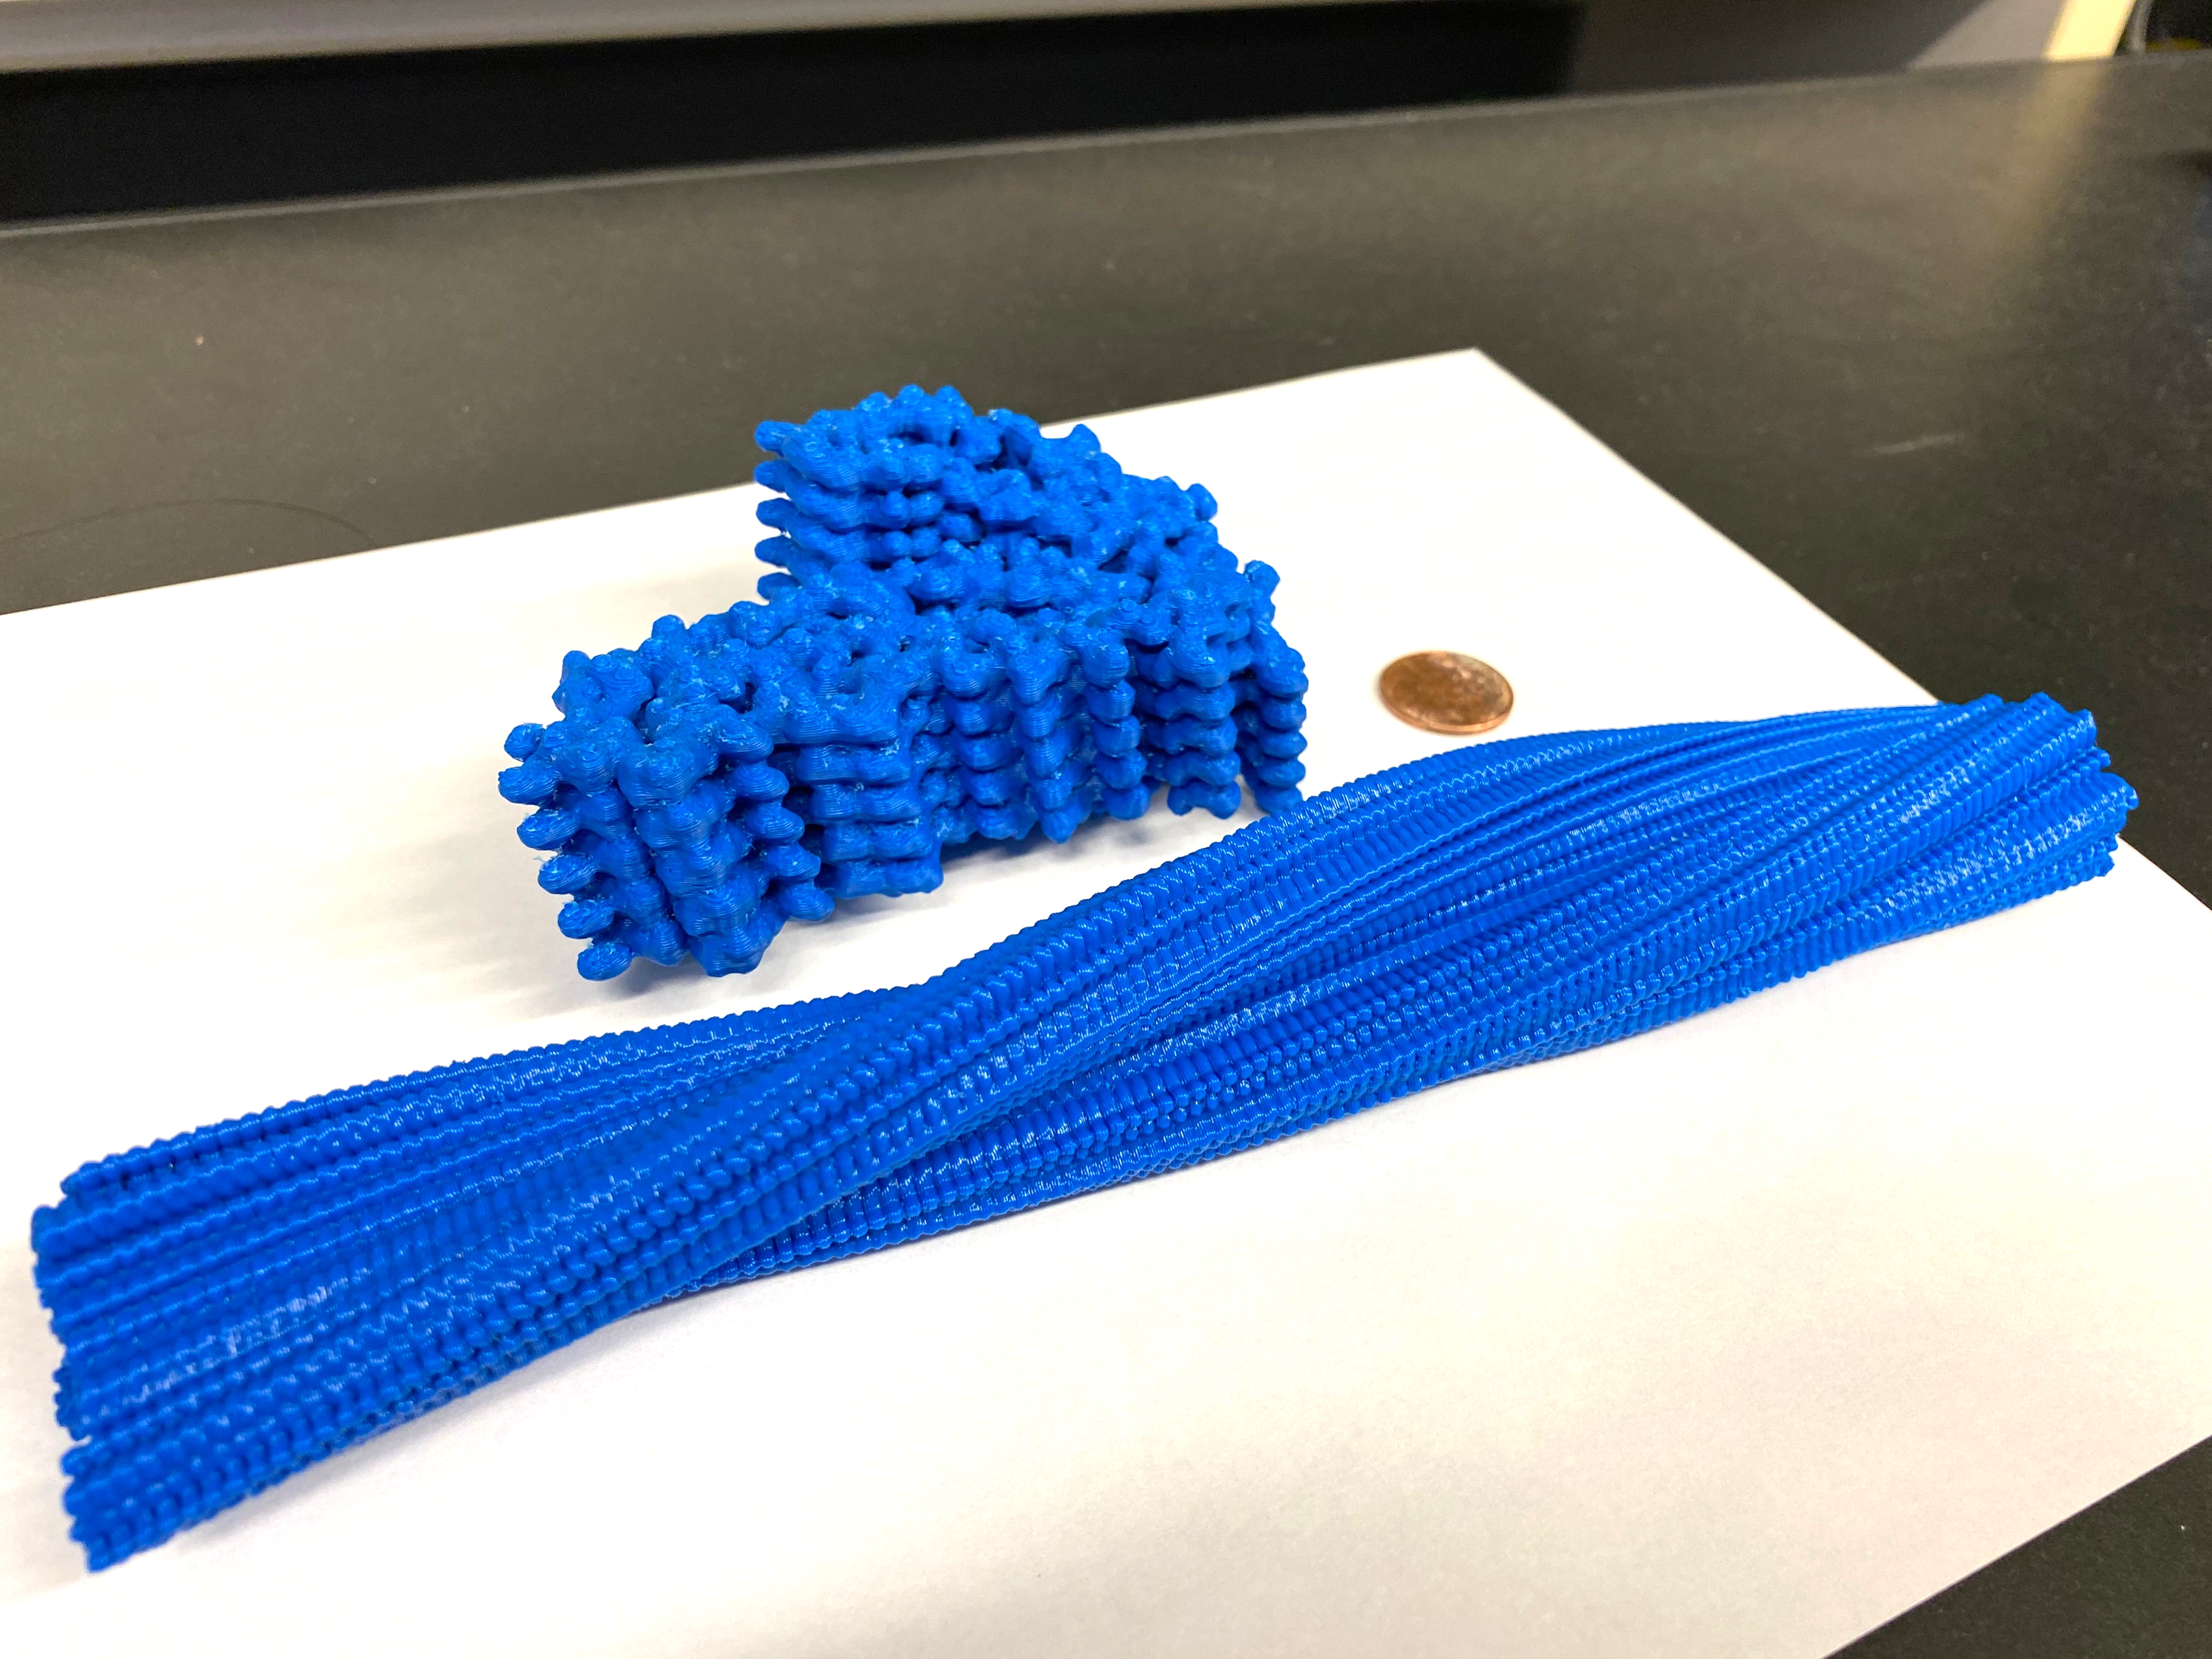 3D printed model of a protein